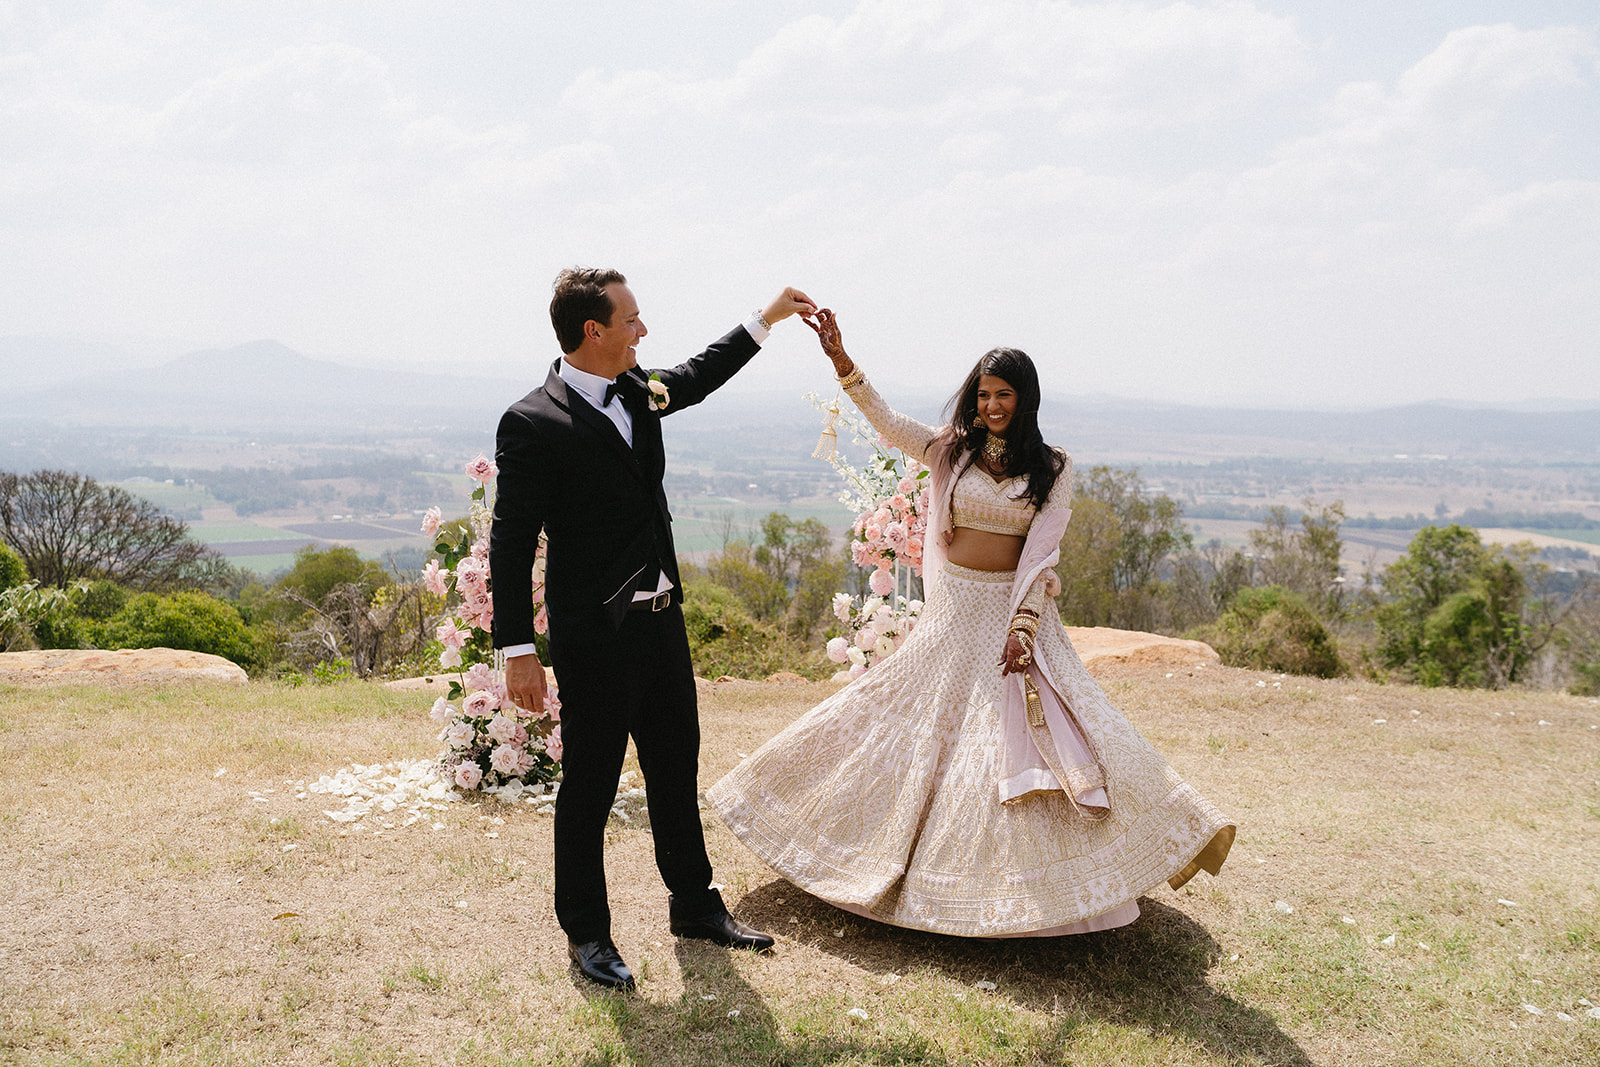 Indian Bride and Groom dancing during their Scenic Rim Wedding Photography Session